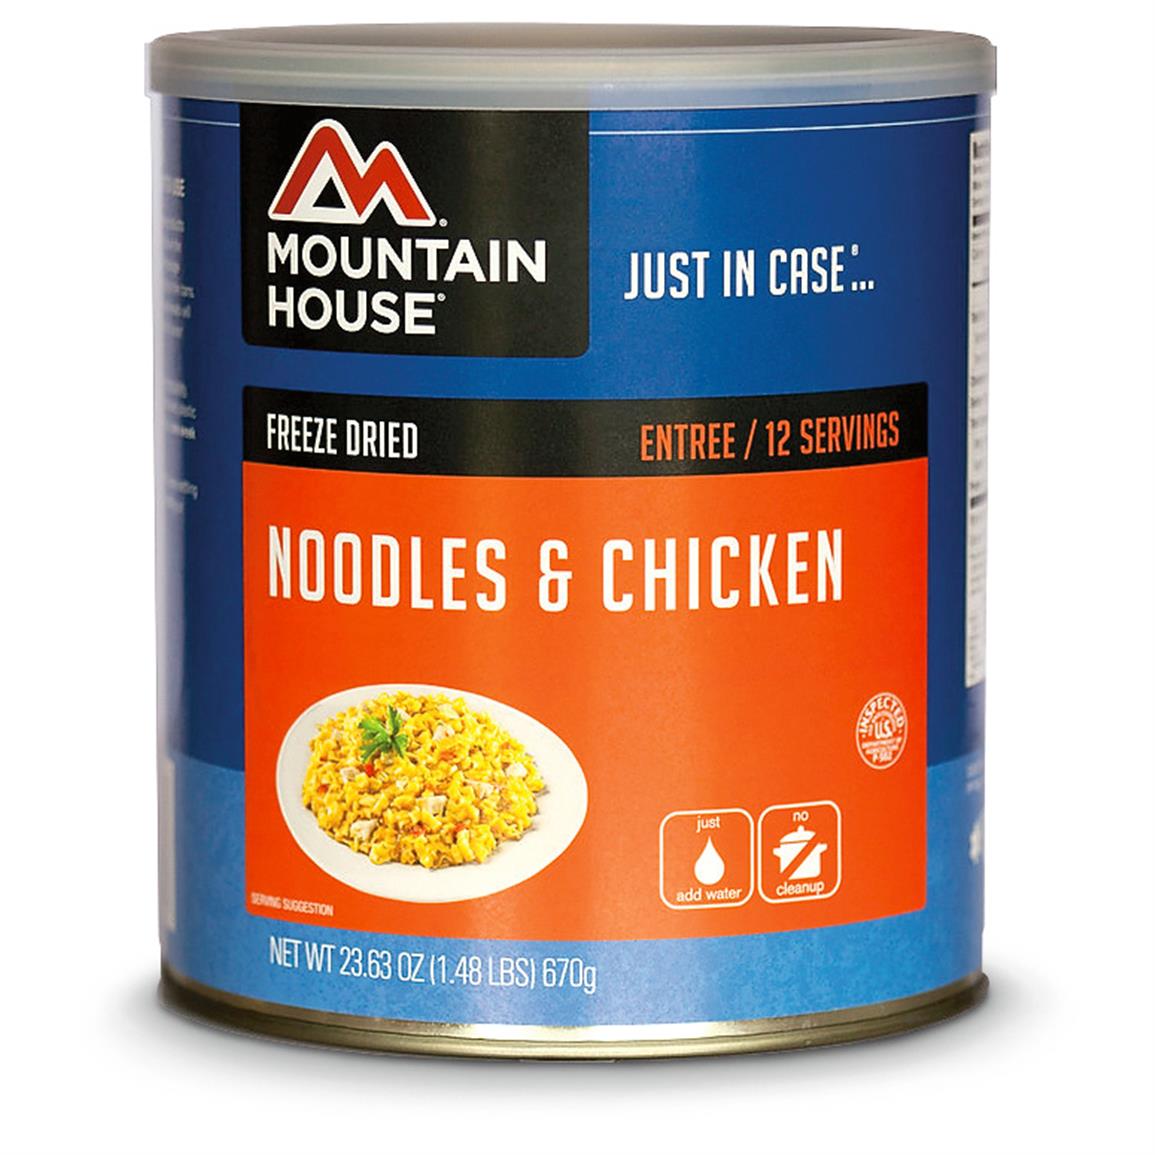 Mountain House Emergency Food Freeze-Dried Noodles and Chicken, 12 Servings